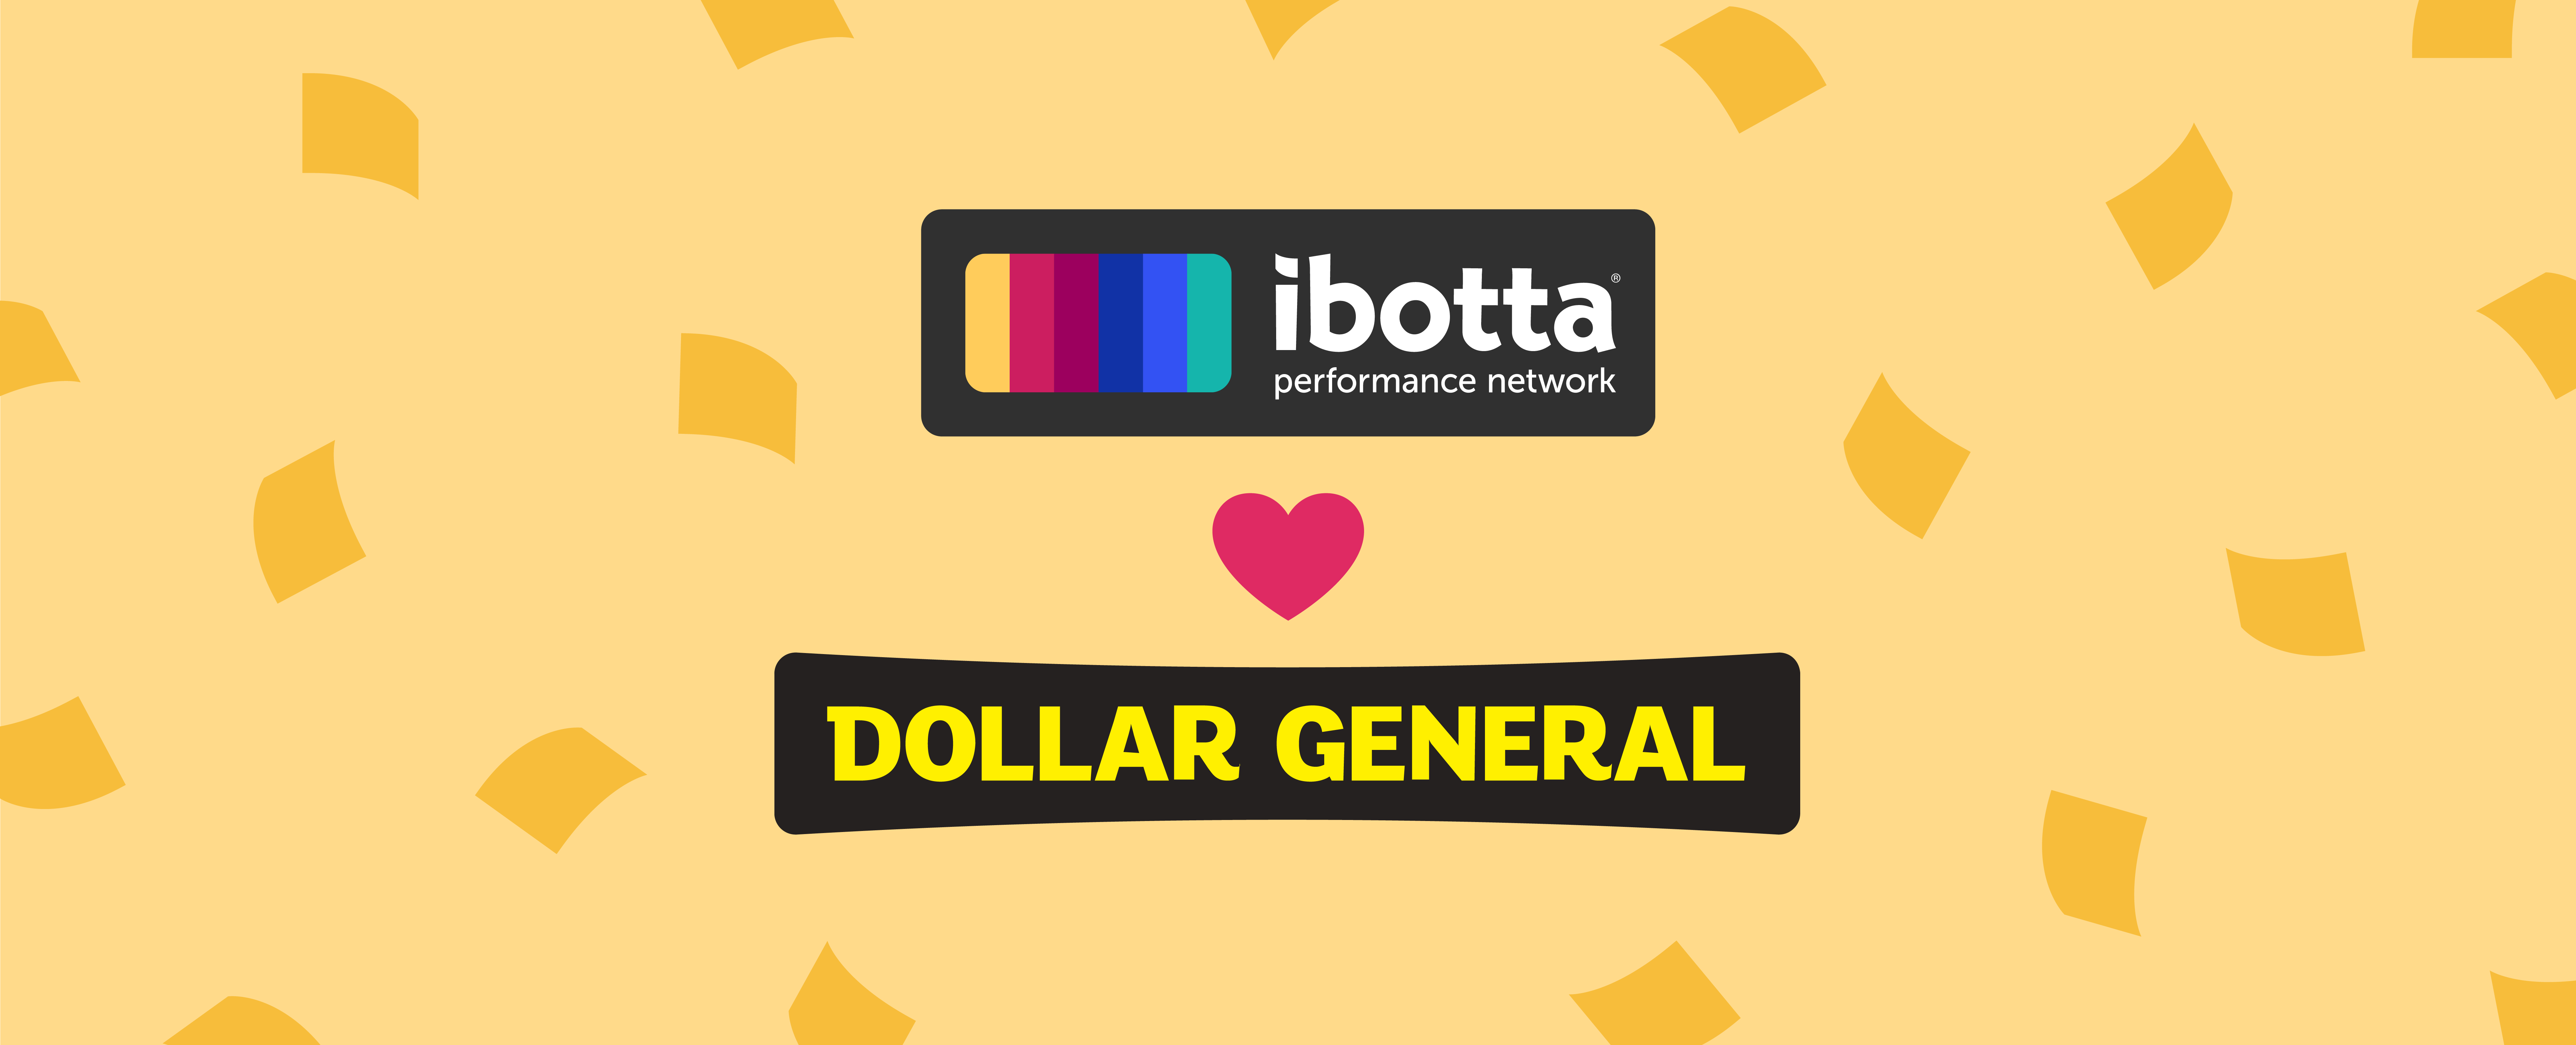 Dollar General partners with Ibotta, joins the IPN